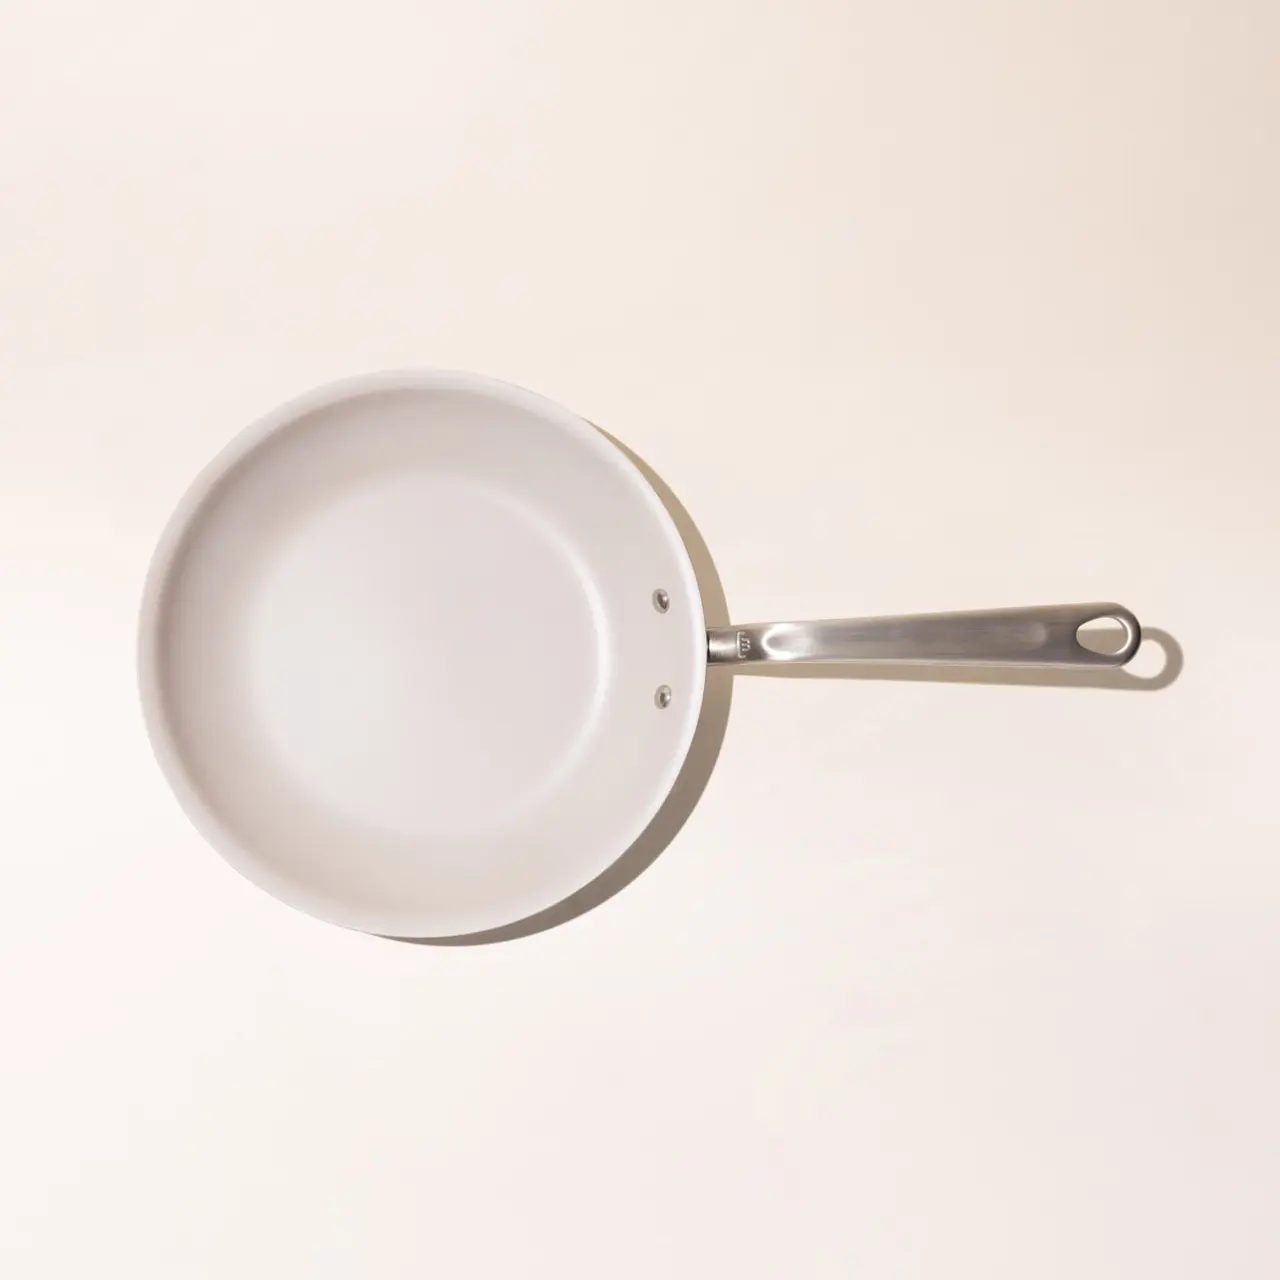 A single white frying pan with a stainless steel handle on a light background, viewed from above.